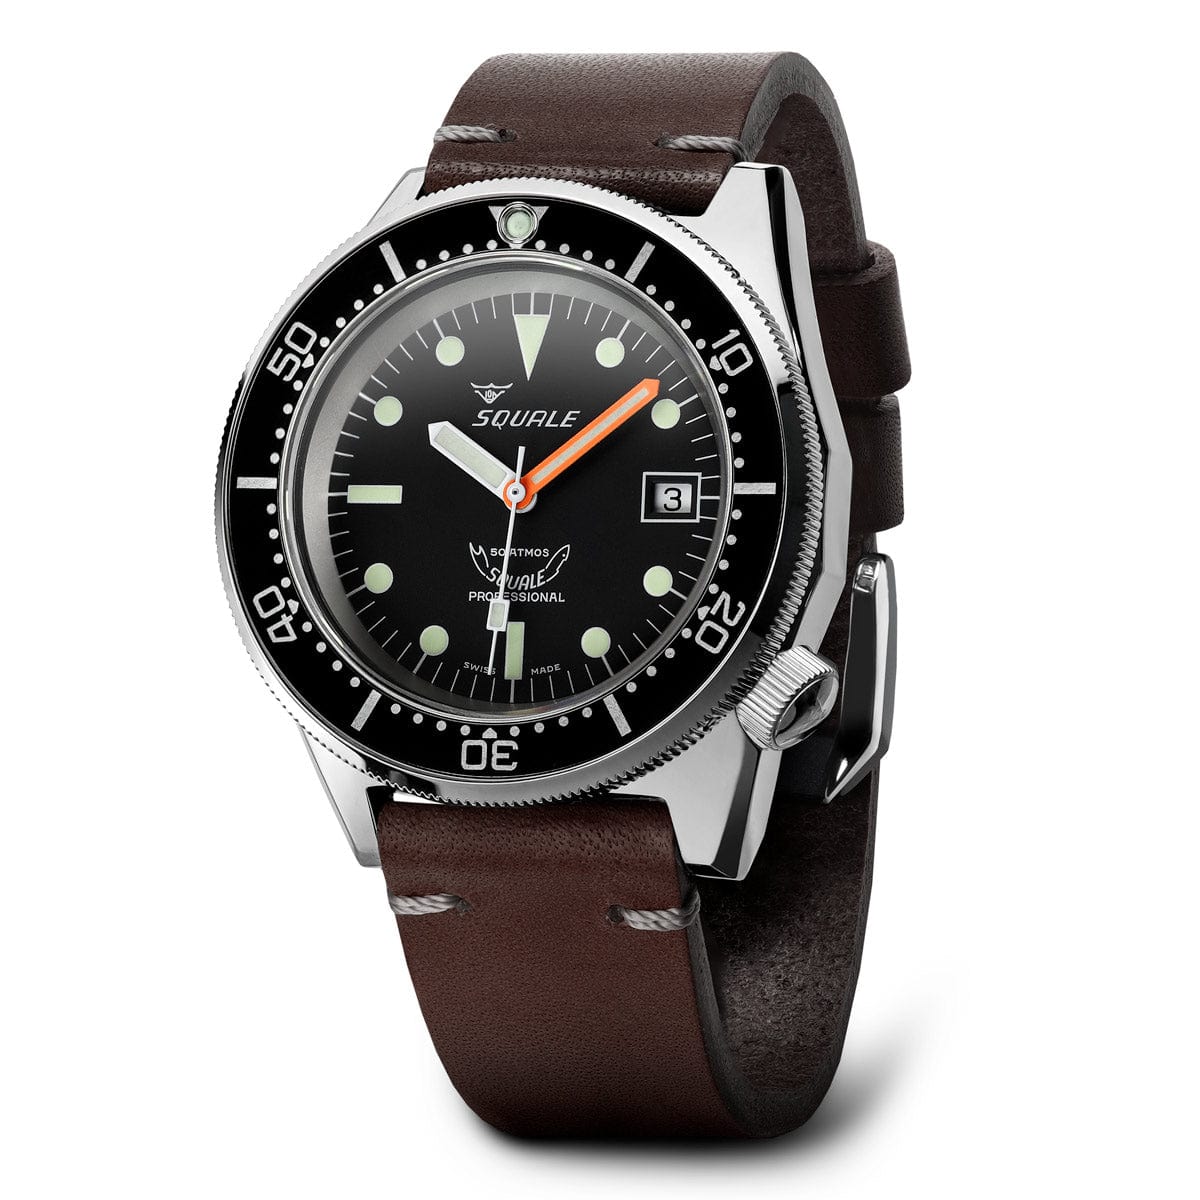 Squale 1521 Swiss Made Diver's Watch Black Dial Polished Case - Leather